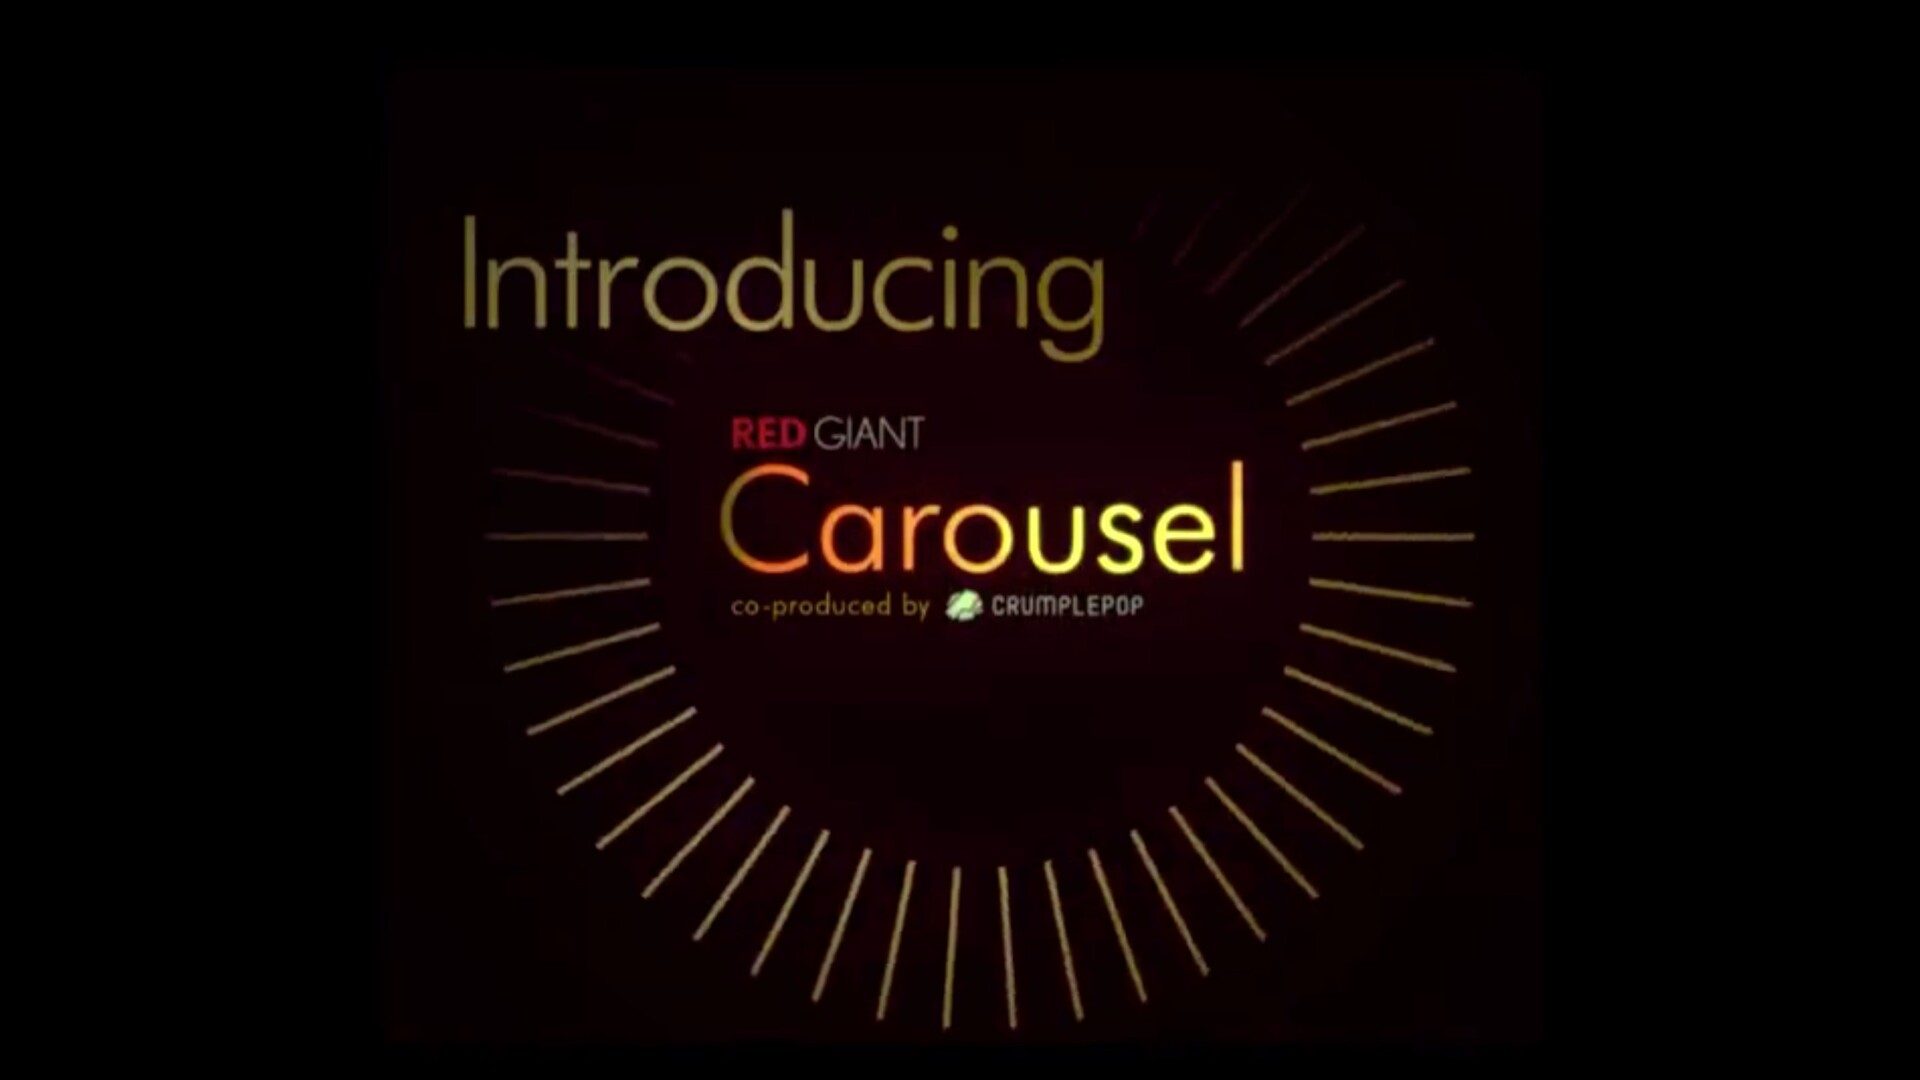 fcpx插件:Red Giant Carousel 老式相机效果